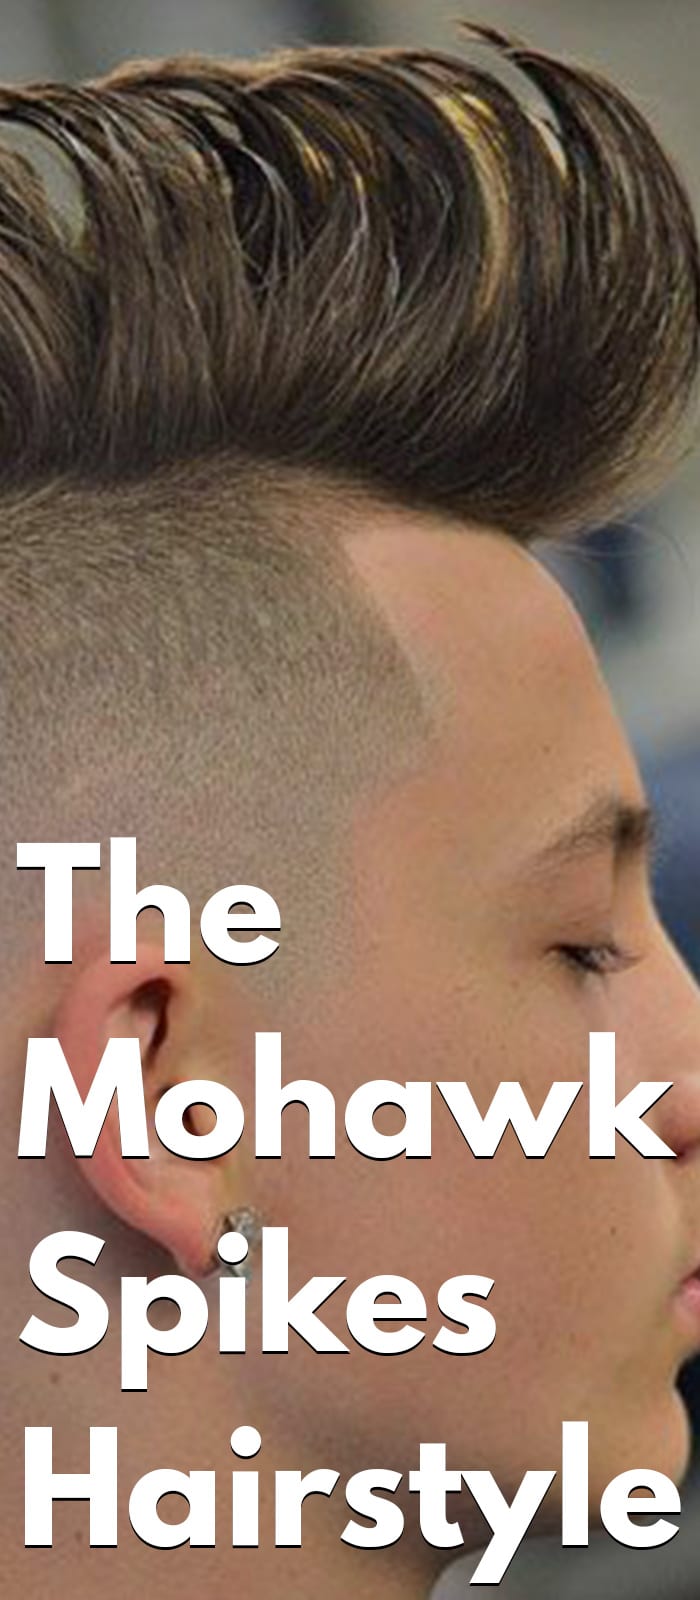 The Mohawk Spikes Hairstyle